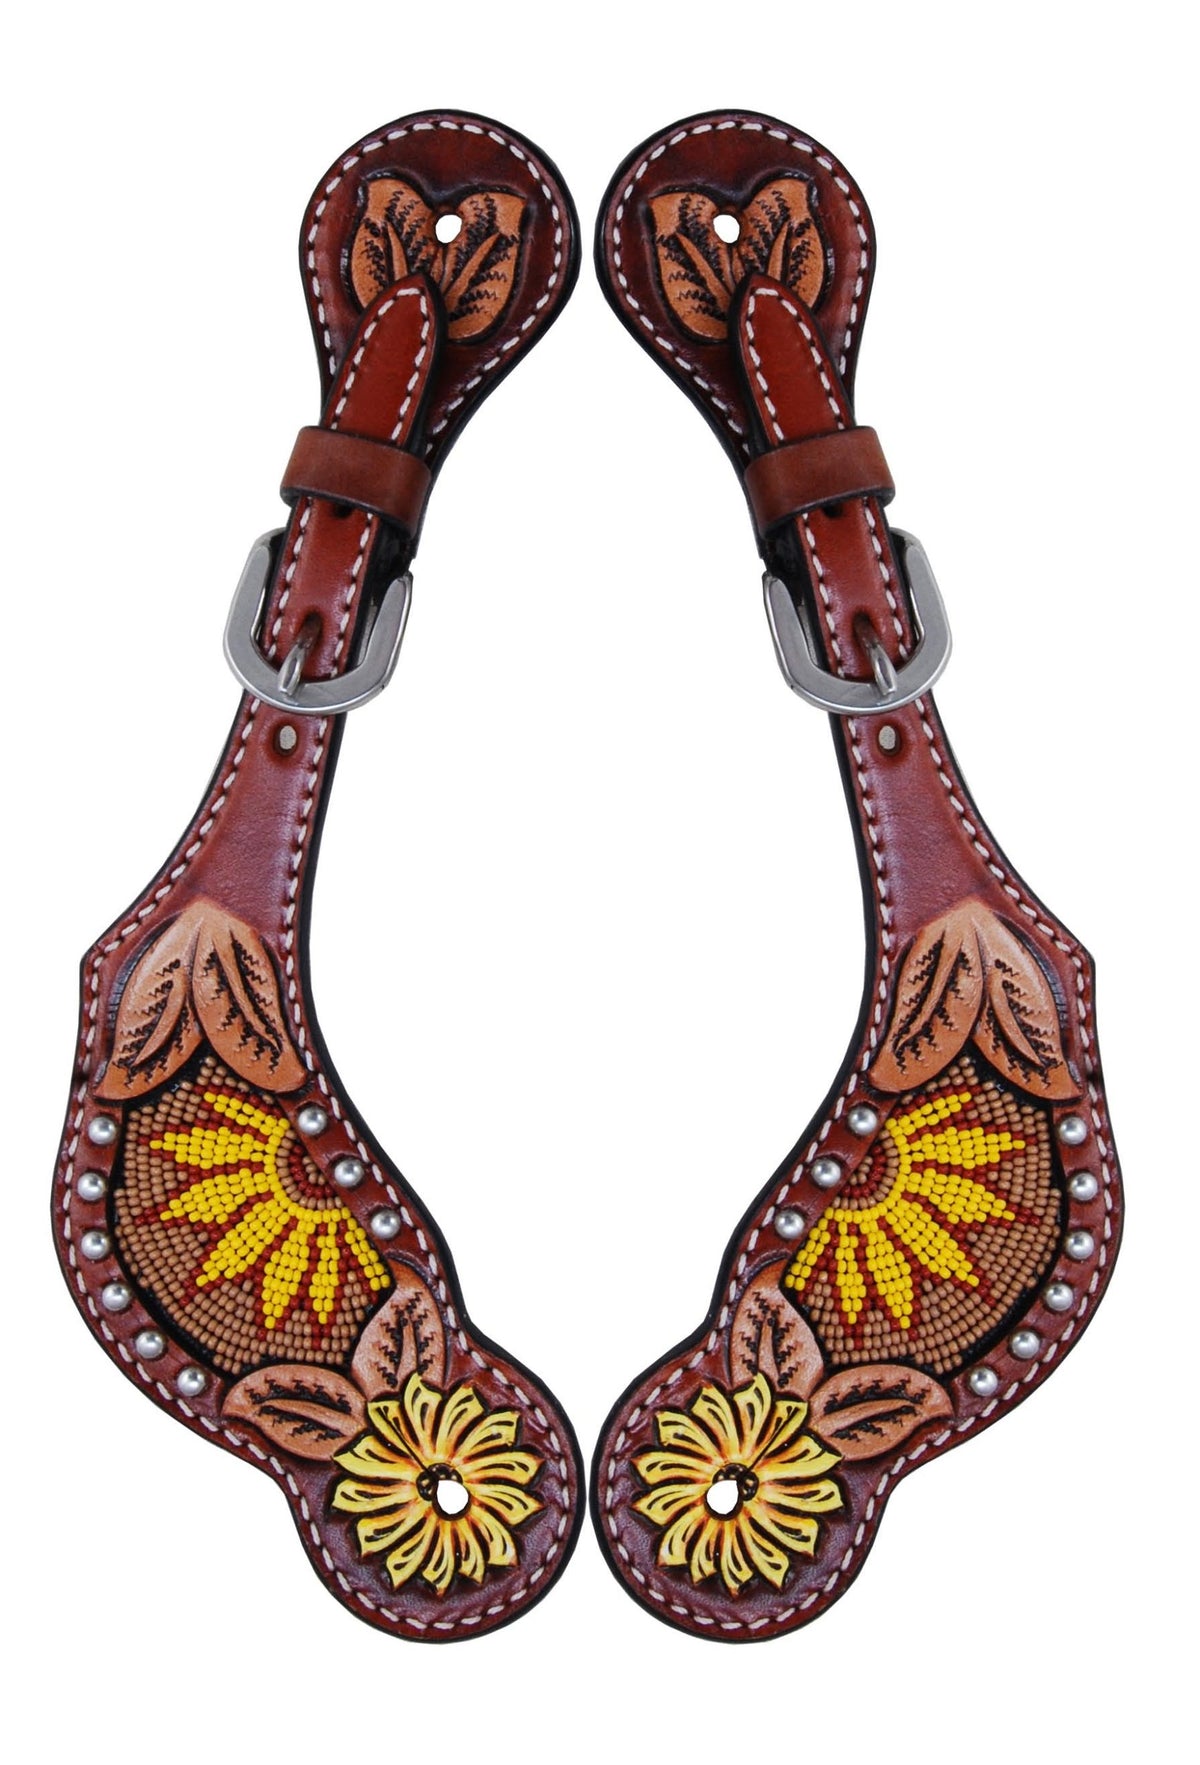 Rafter T Ranch Ladies Spur Strap with Hand Painted Sun Flower